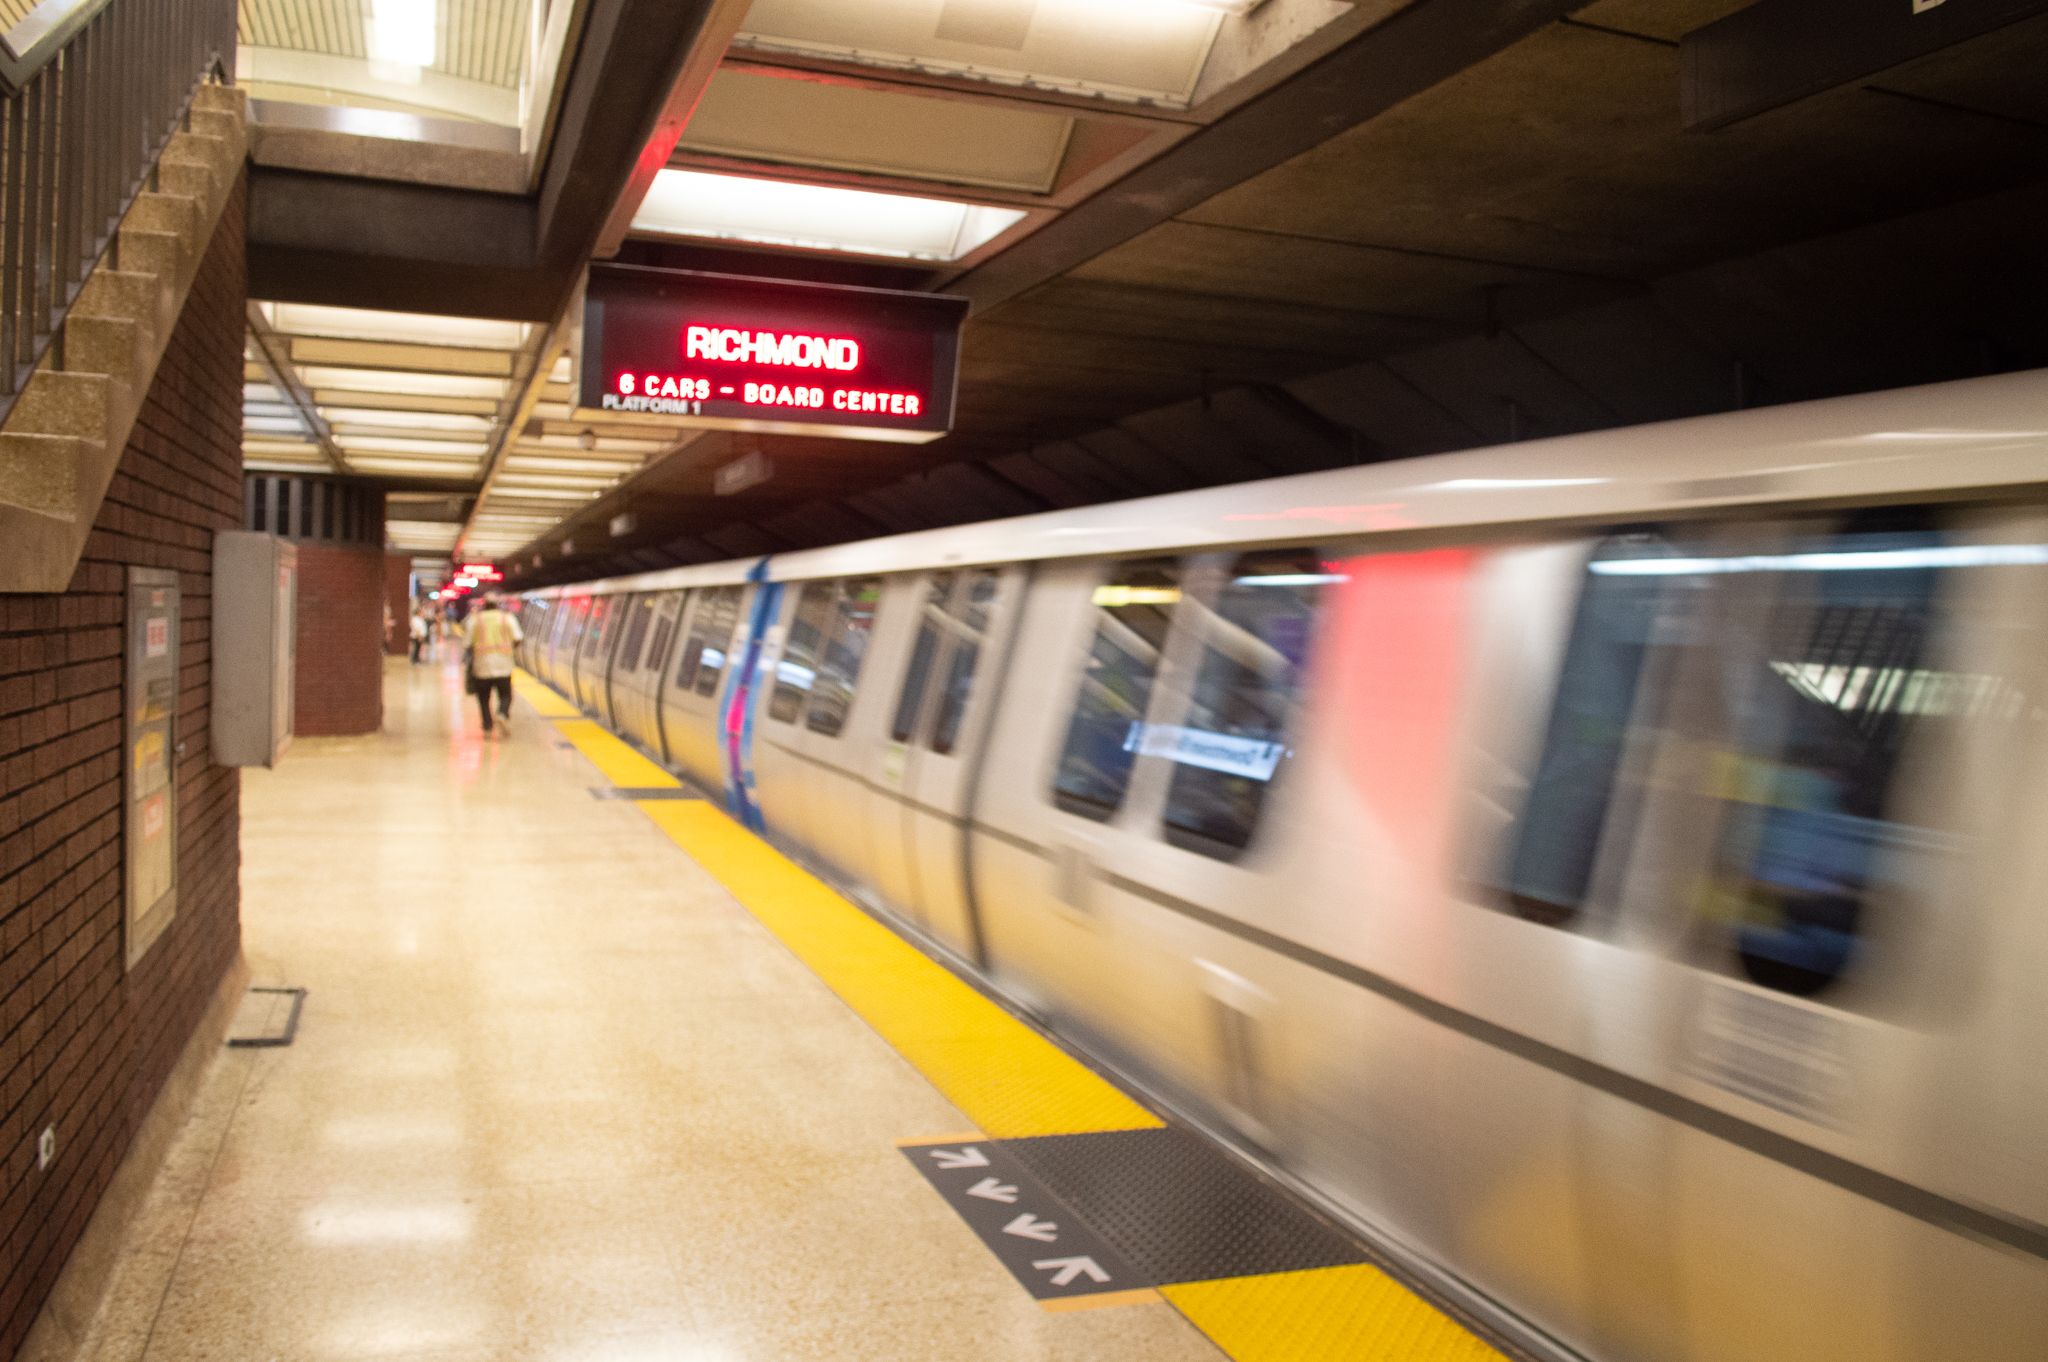 BART is offering half-off fare discounts in September to celebrate its 50th anniversary